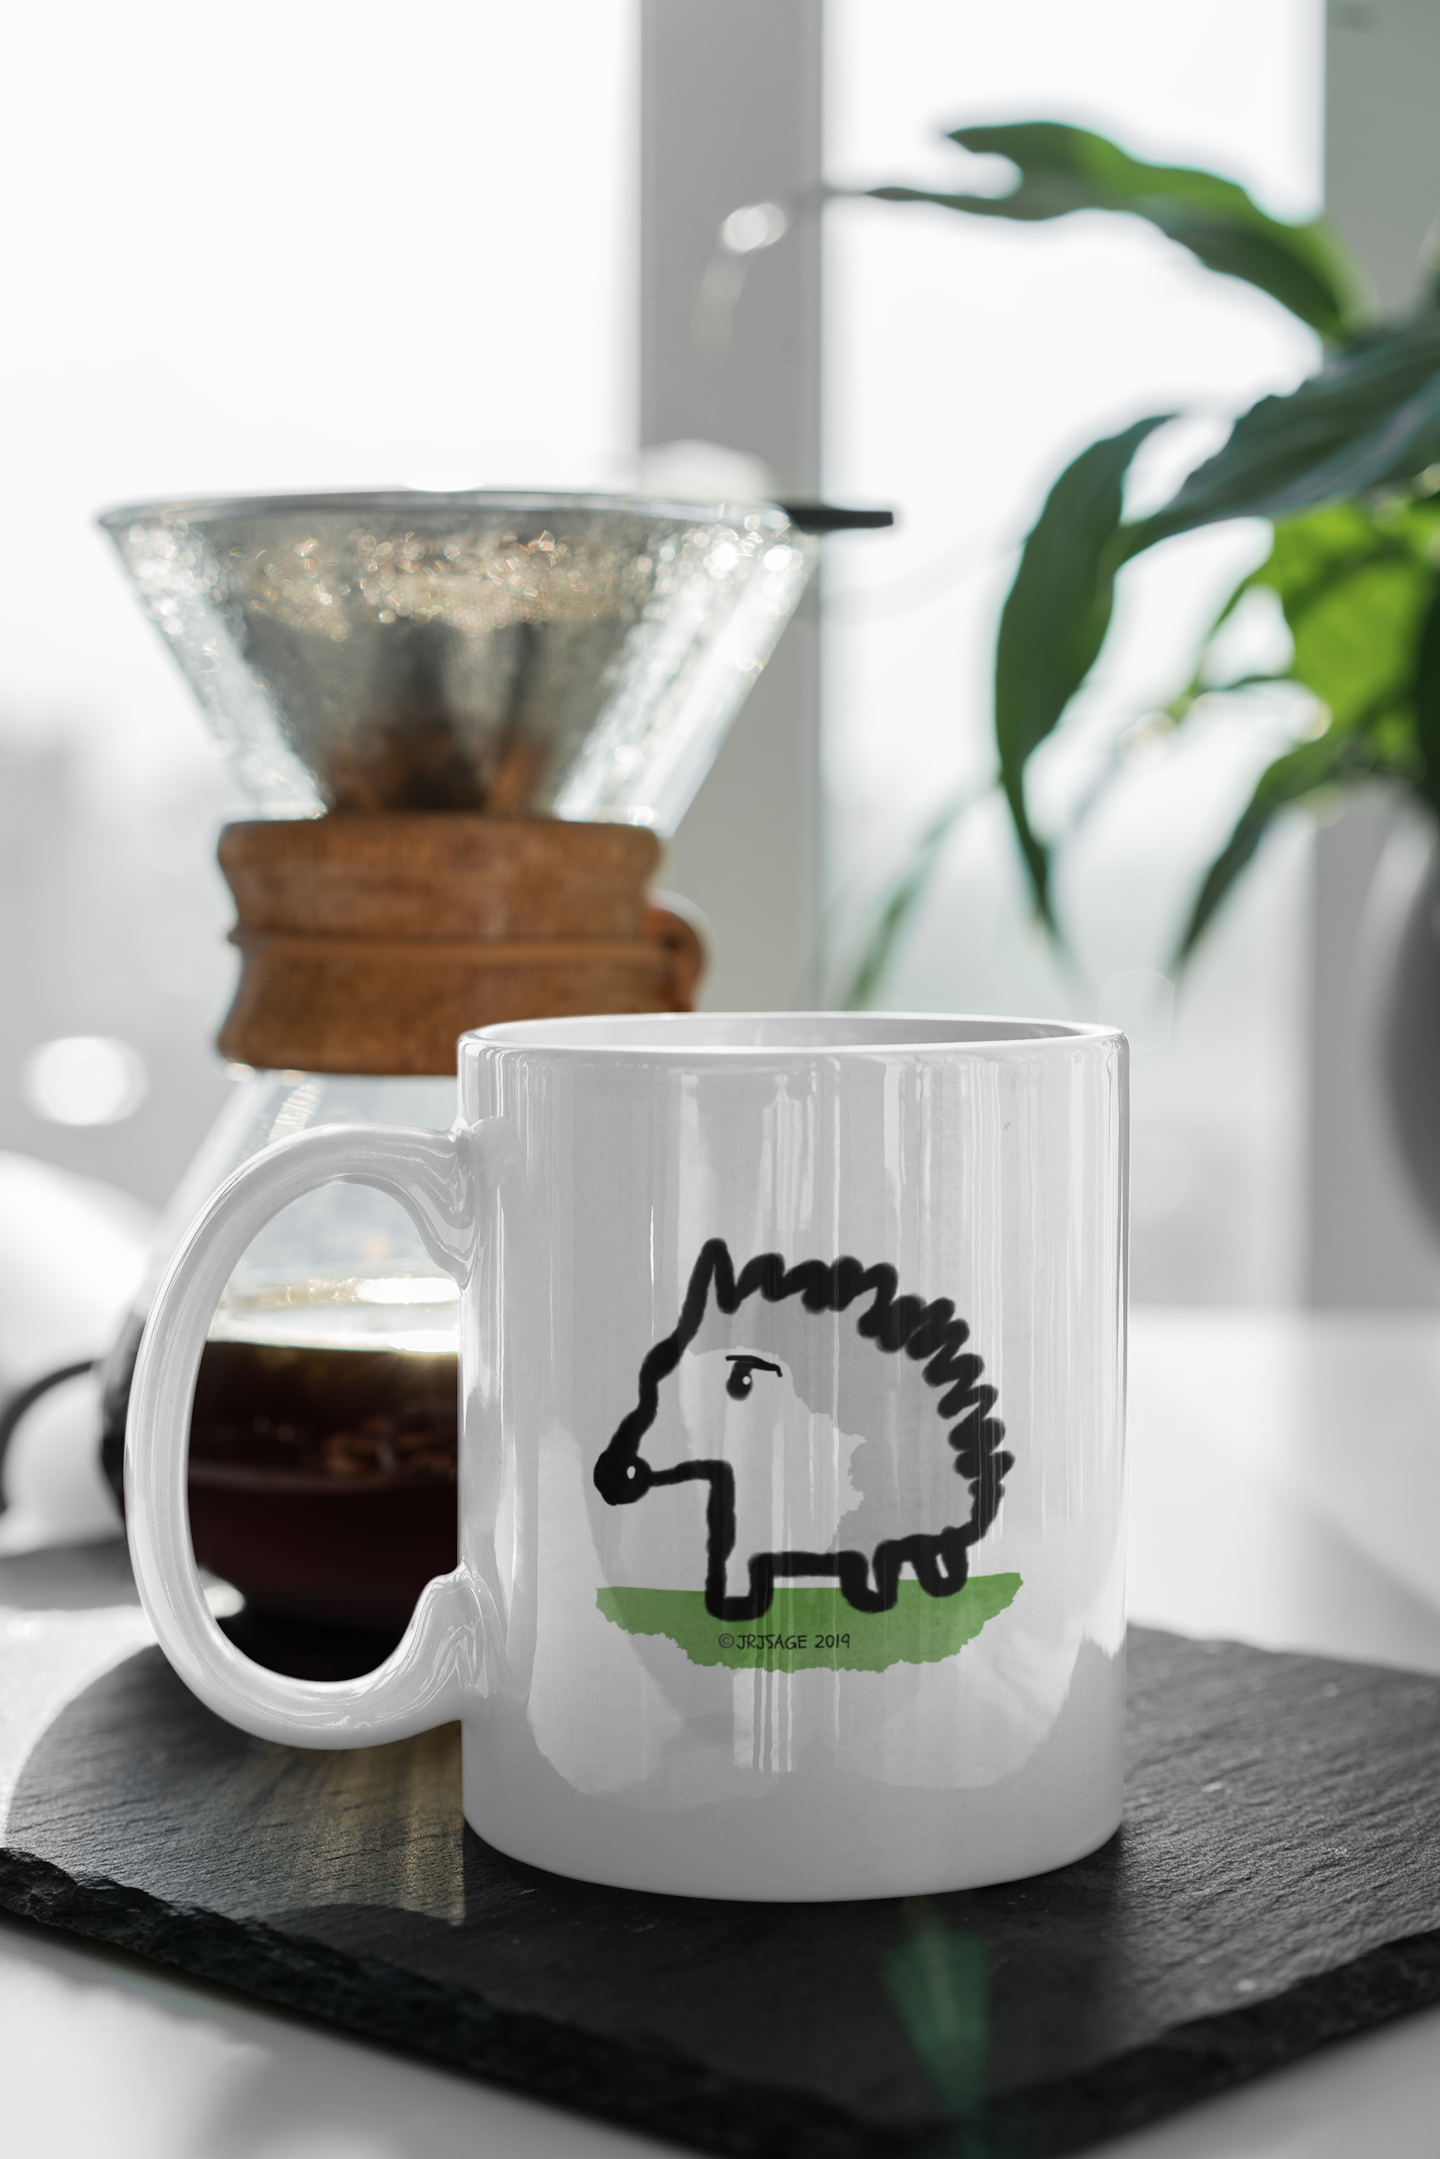 A White Ceramic Hector and Bone Mug with an illustration of a cute Baby Hedgehog on a table